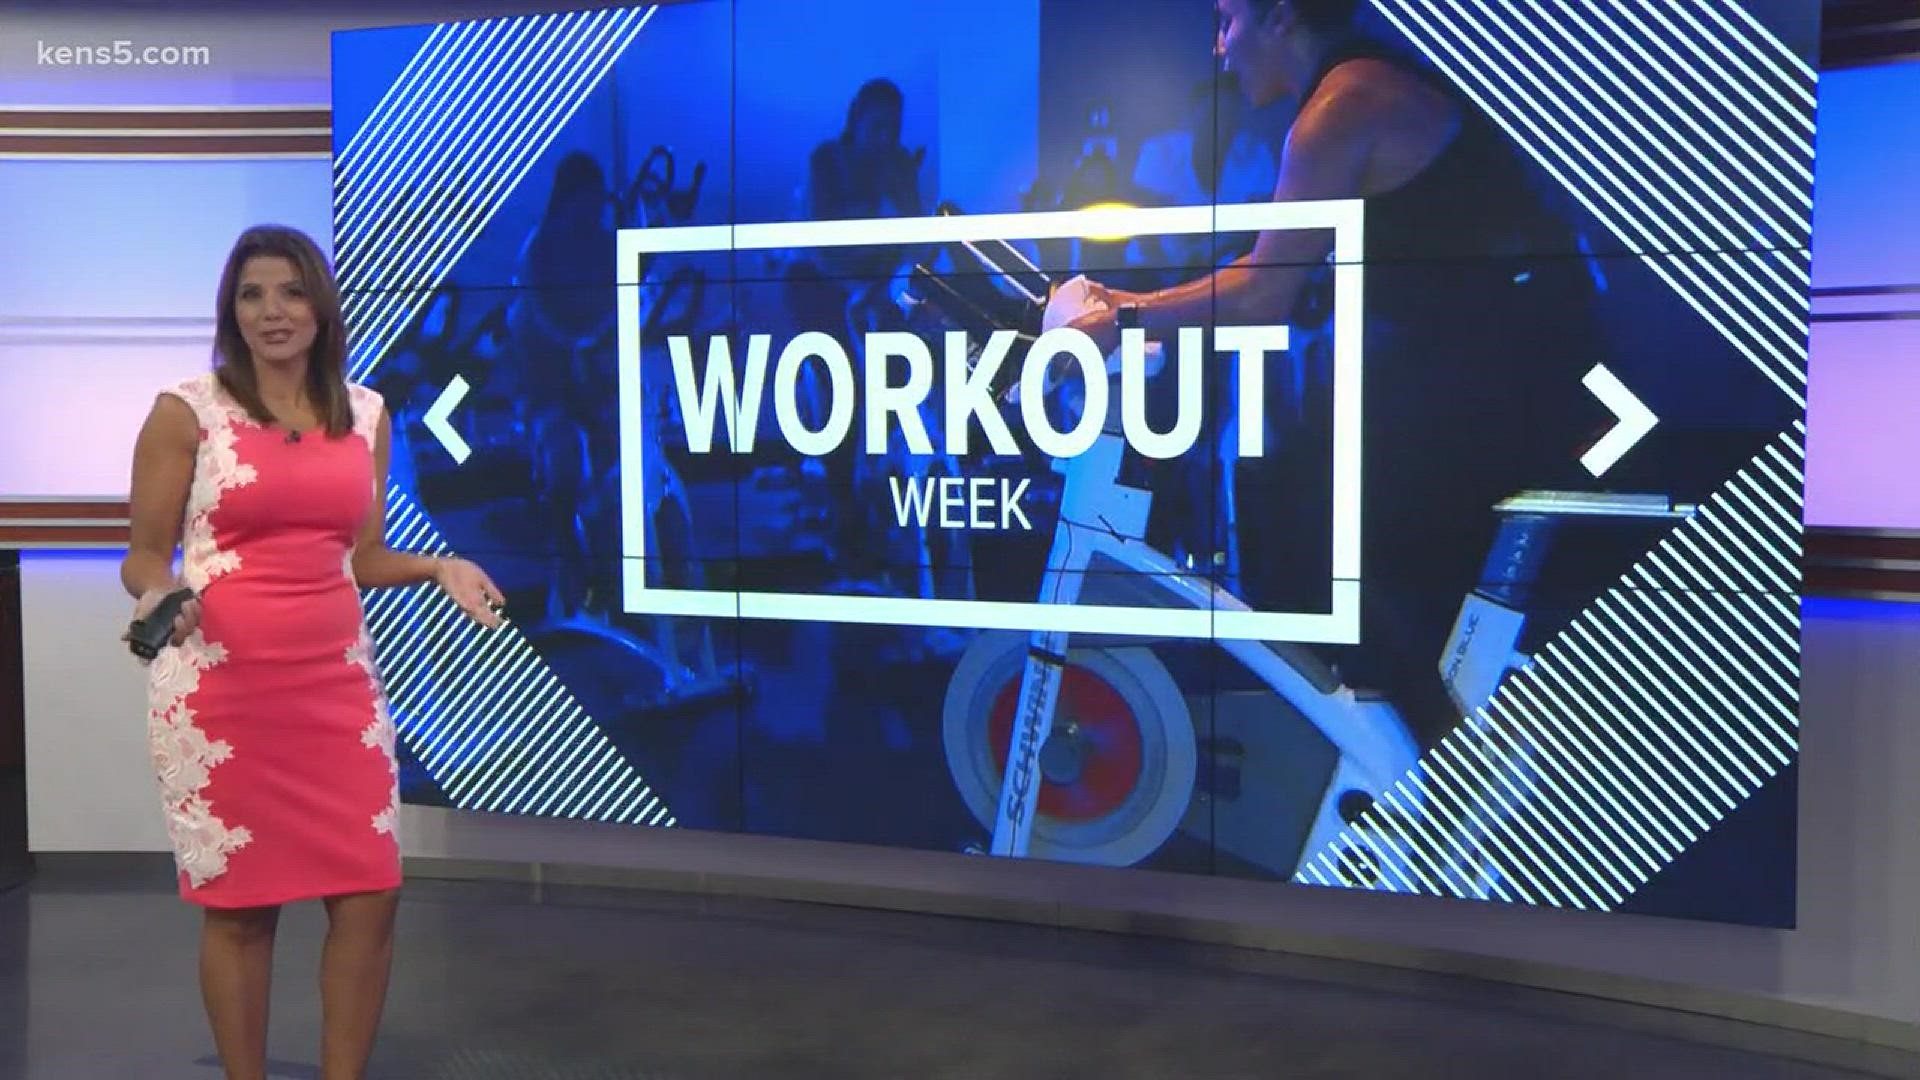 KENS 5's Sarah Forgany takes us for a spin at Joyride Cycle for a full body workout in just under an hour.